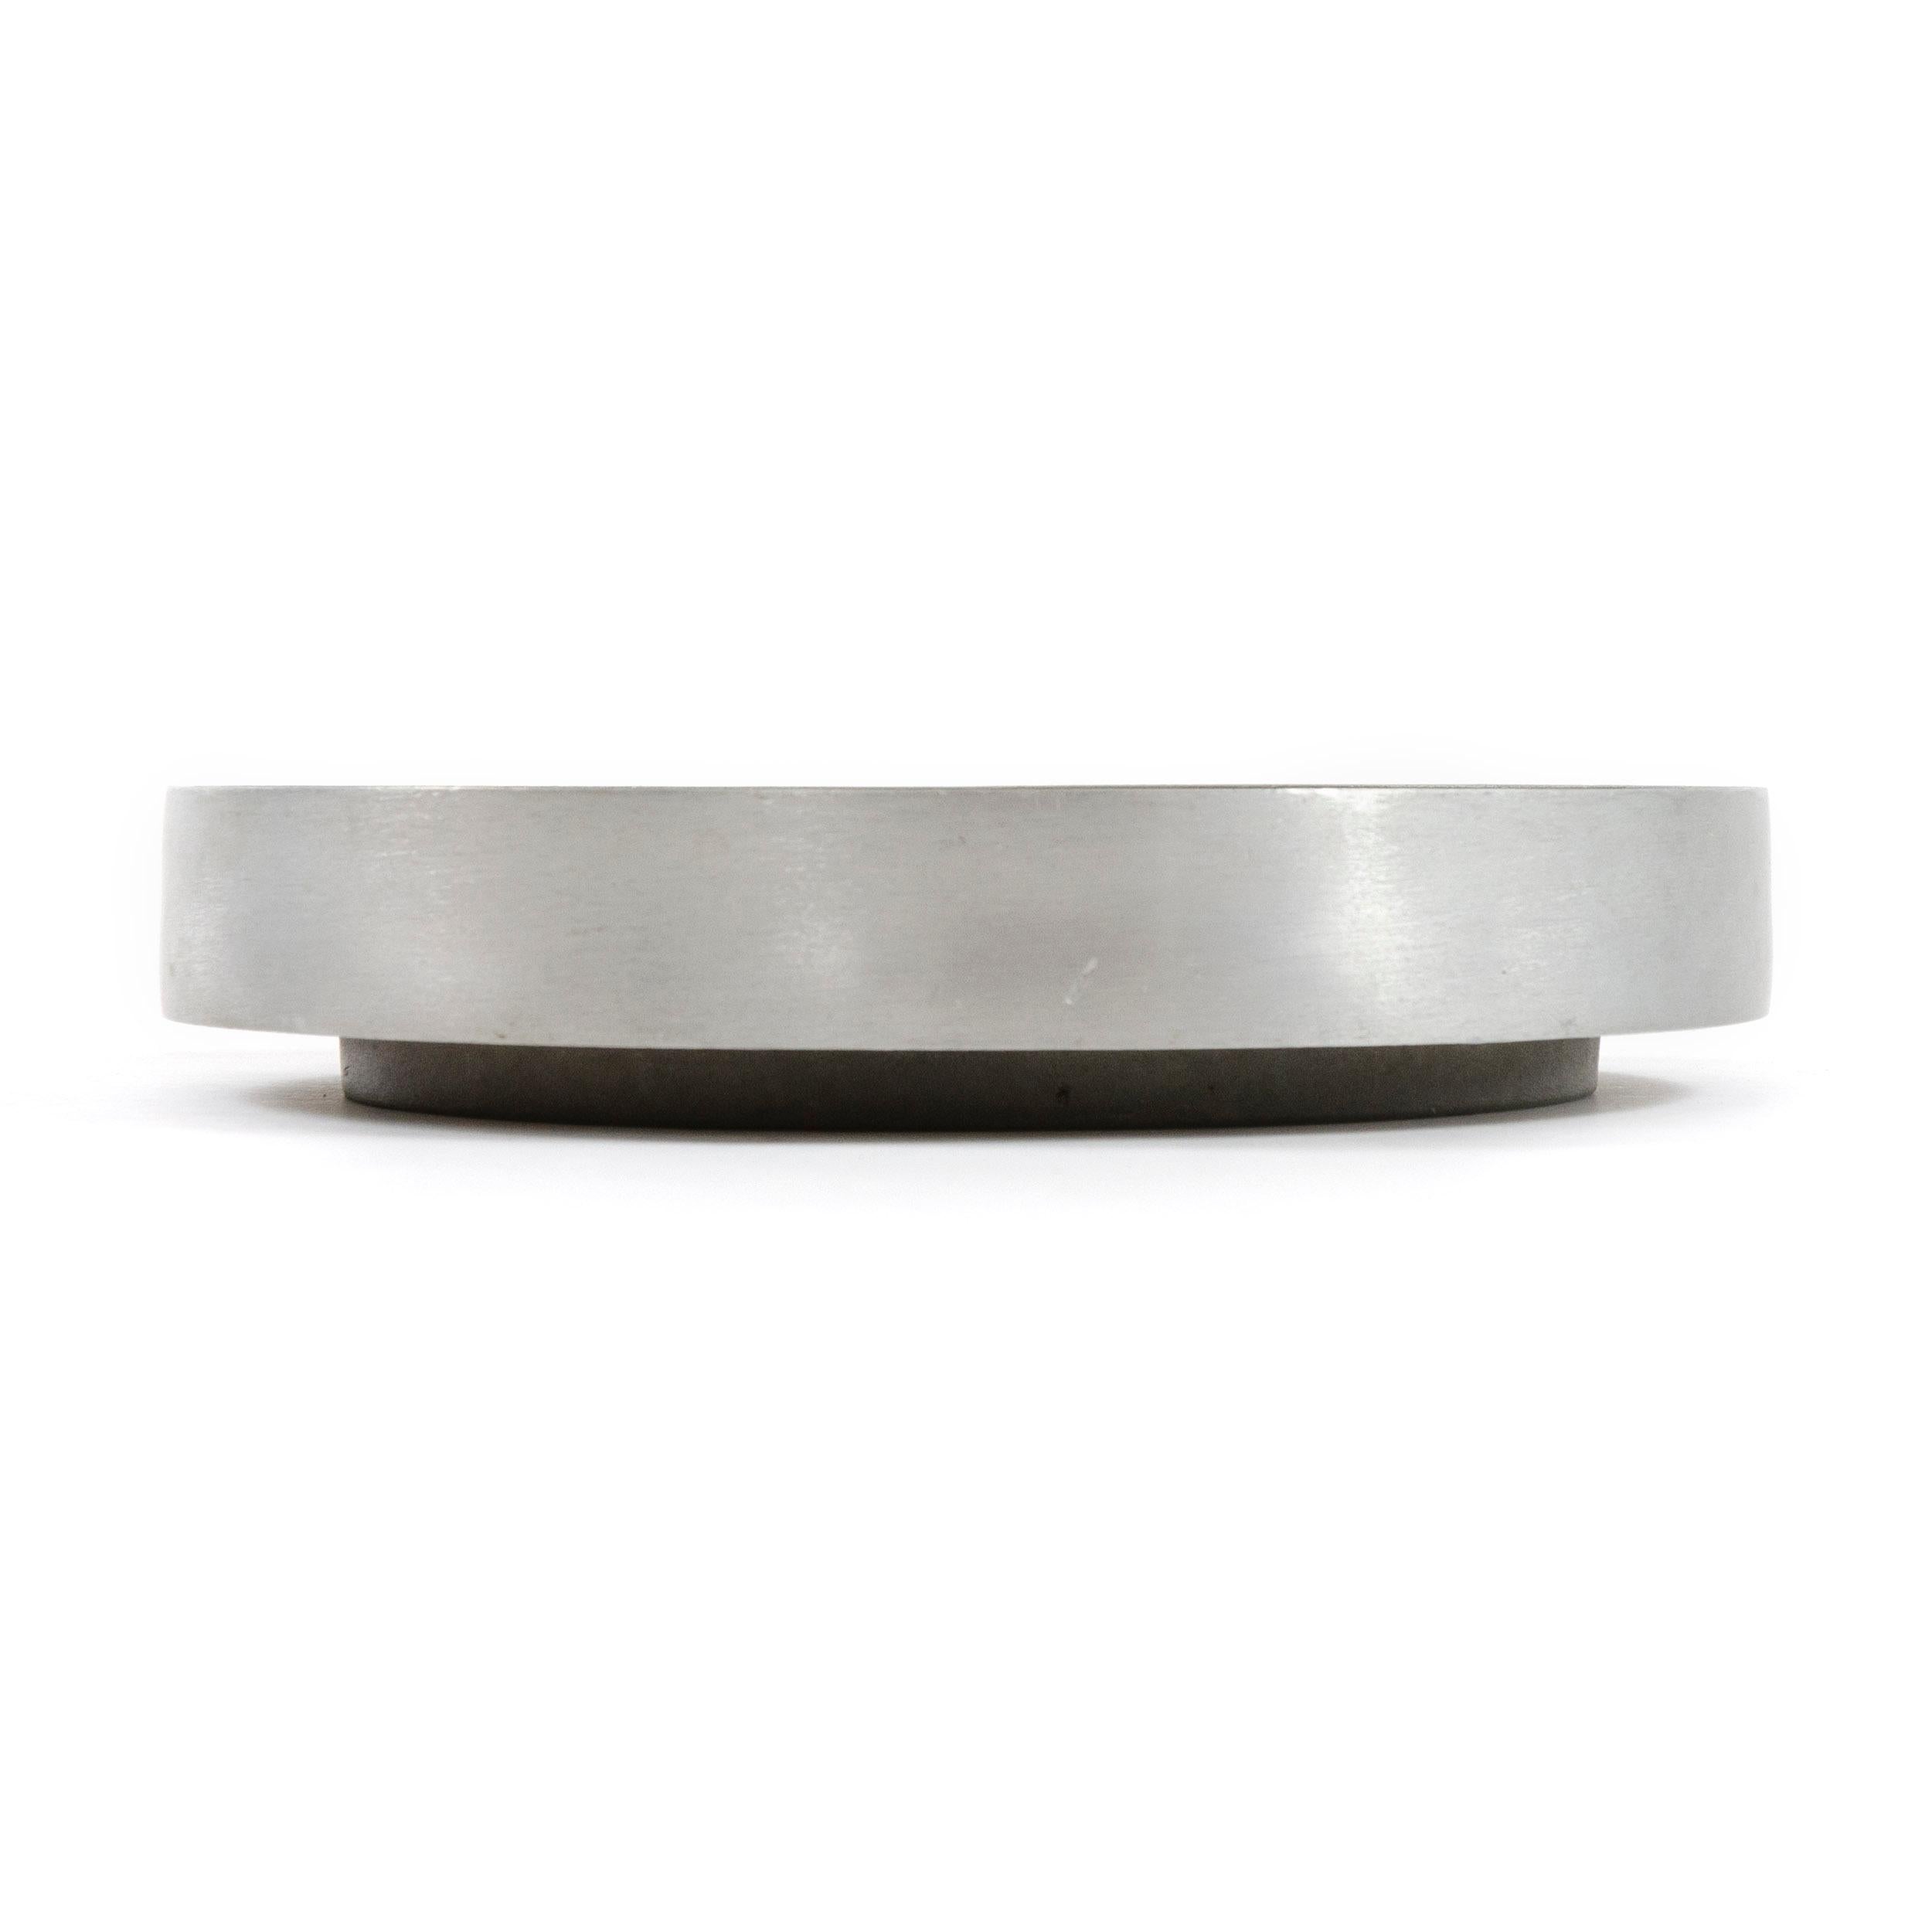 A large scale cast aluminum ashtray with concentric circles.